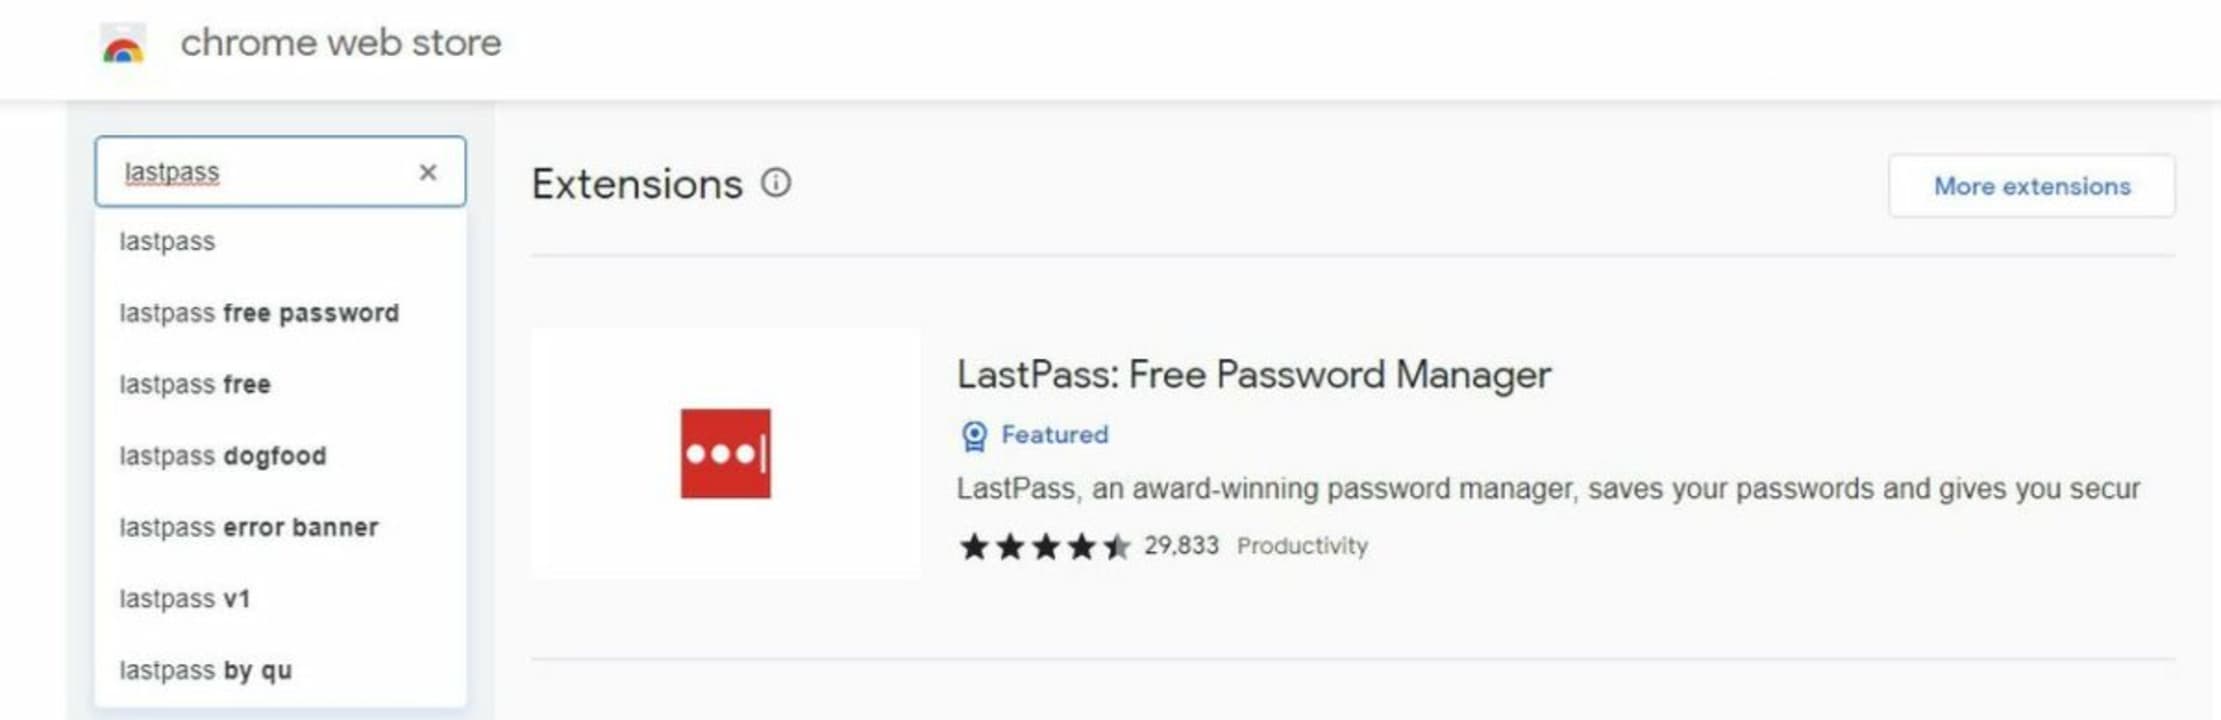 LastPass in the Chrome Webstore